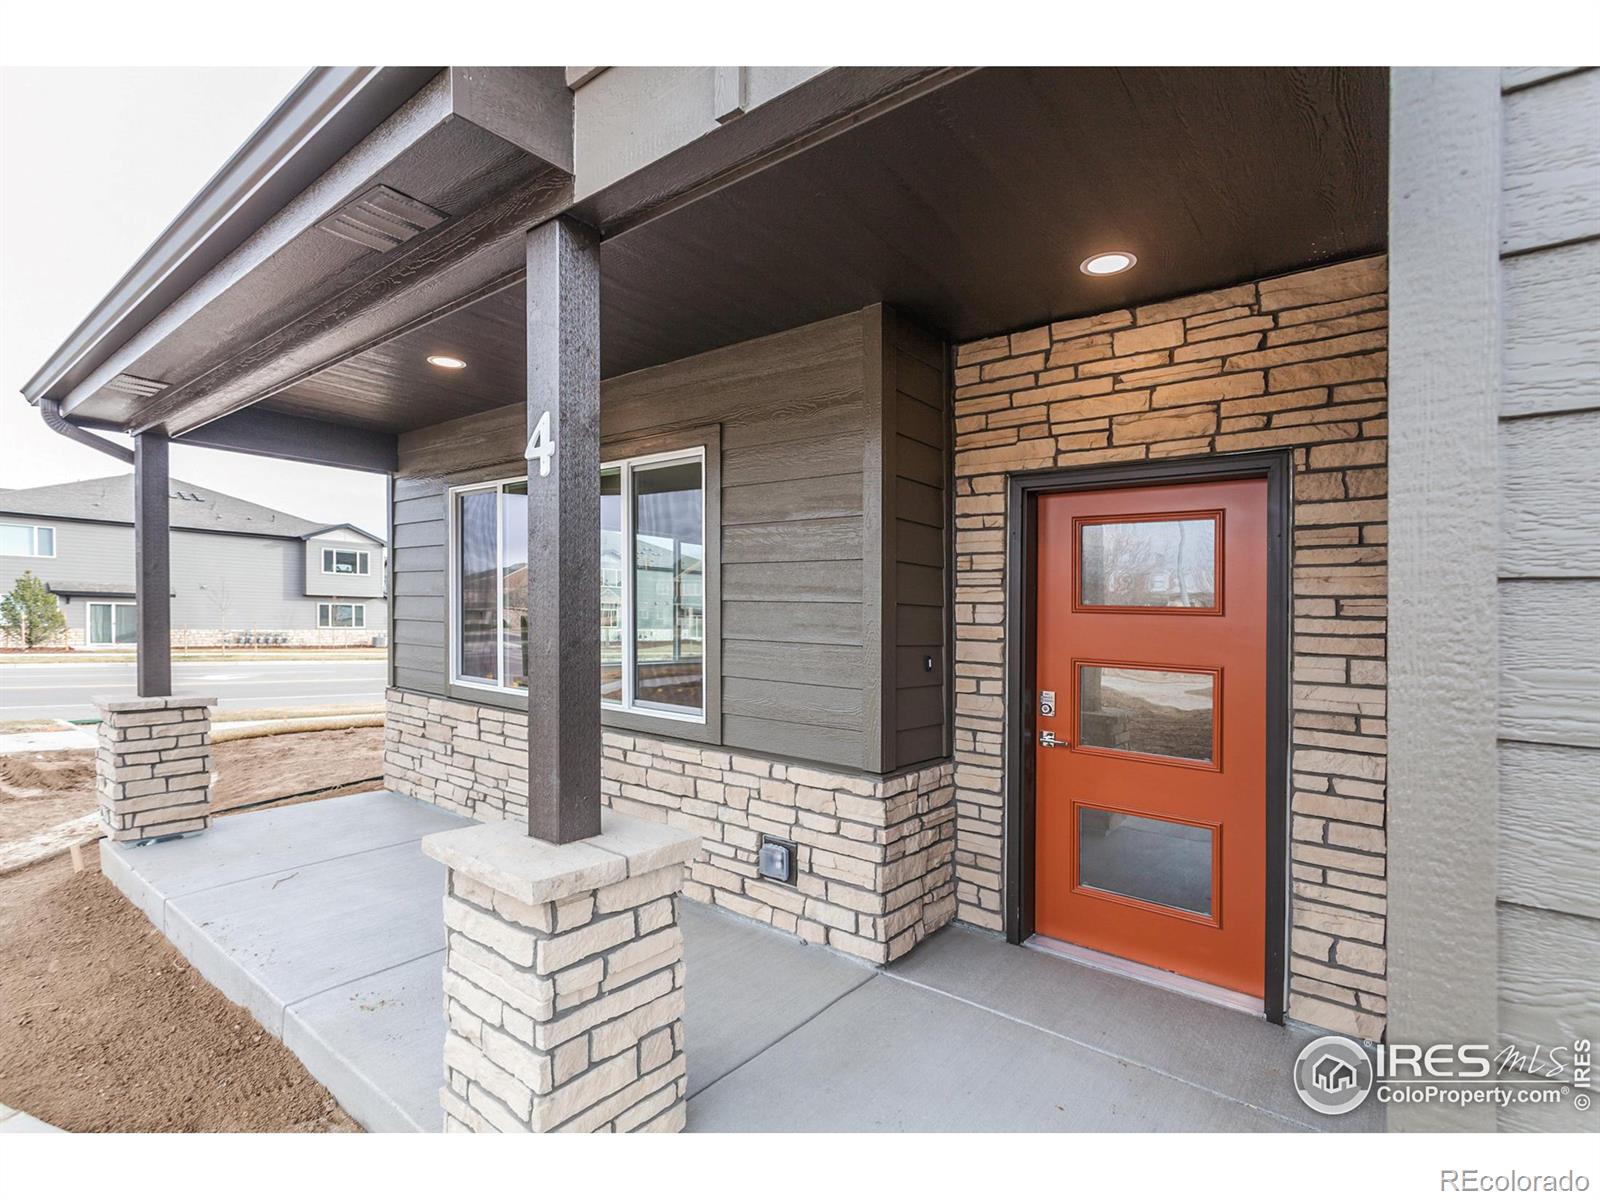 CMA Image for 6939  4th st rd,Greeley, Colorado